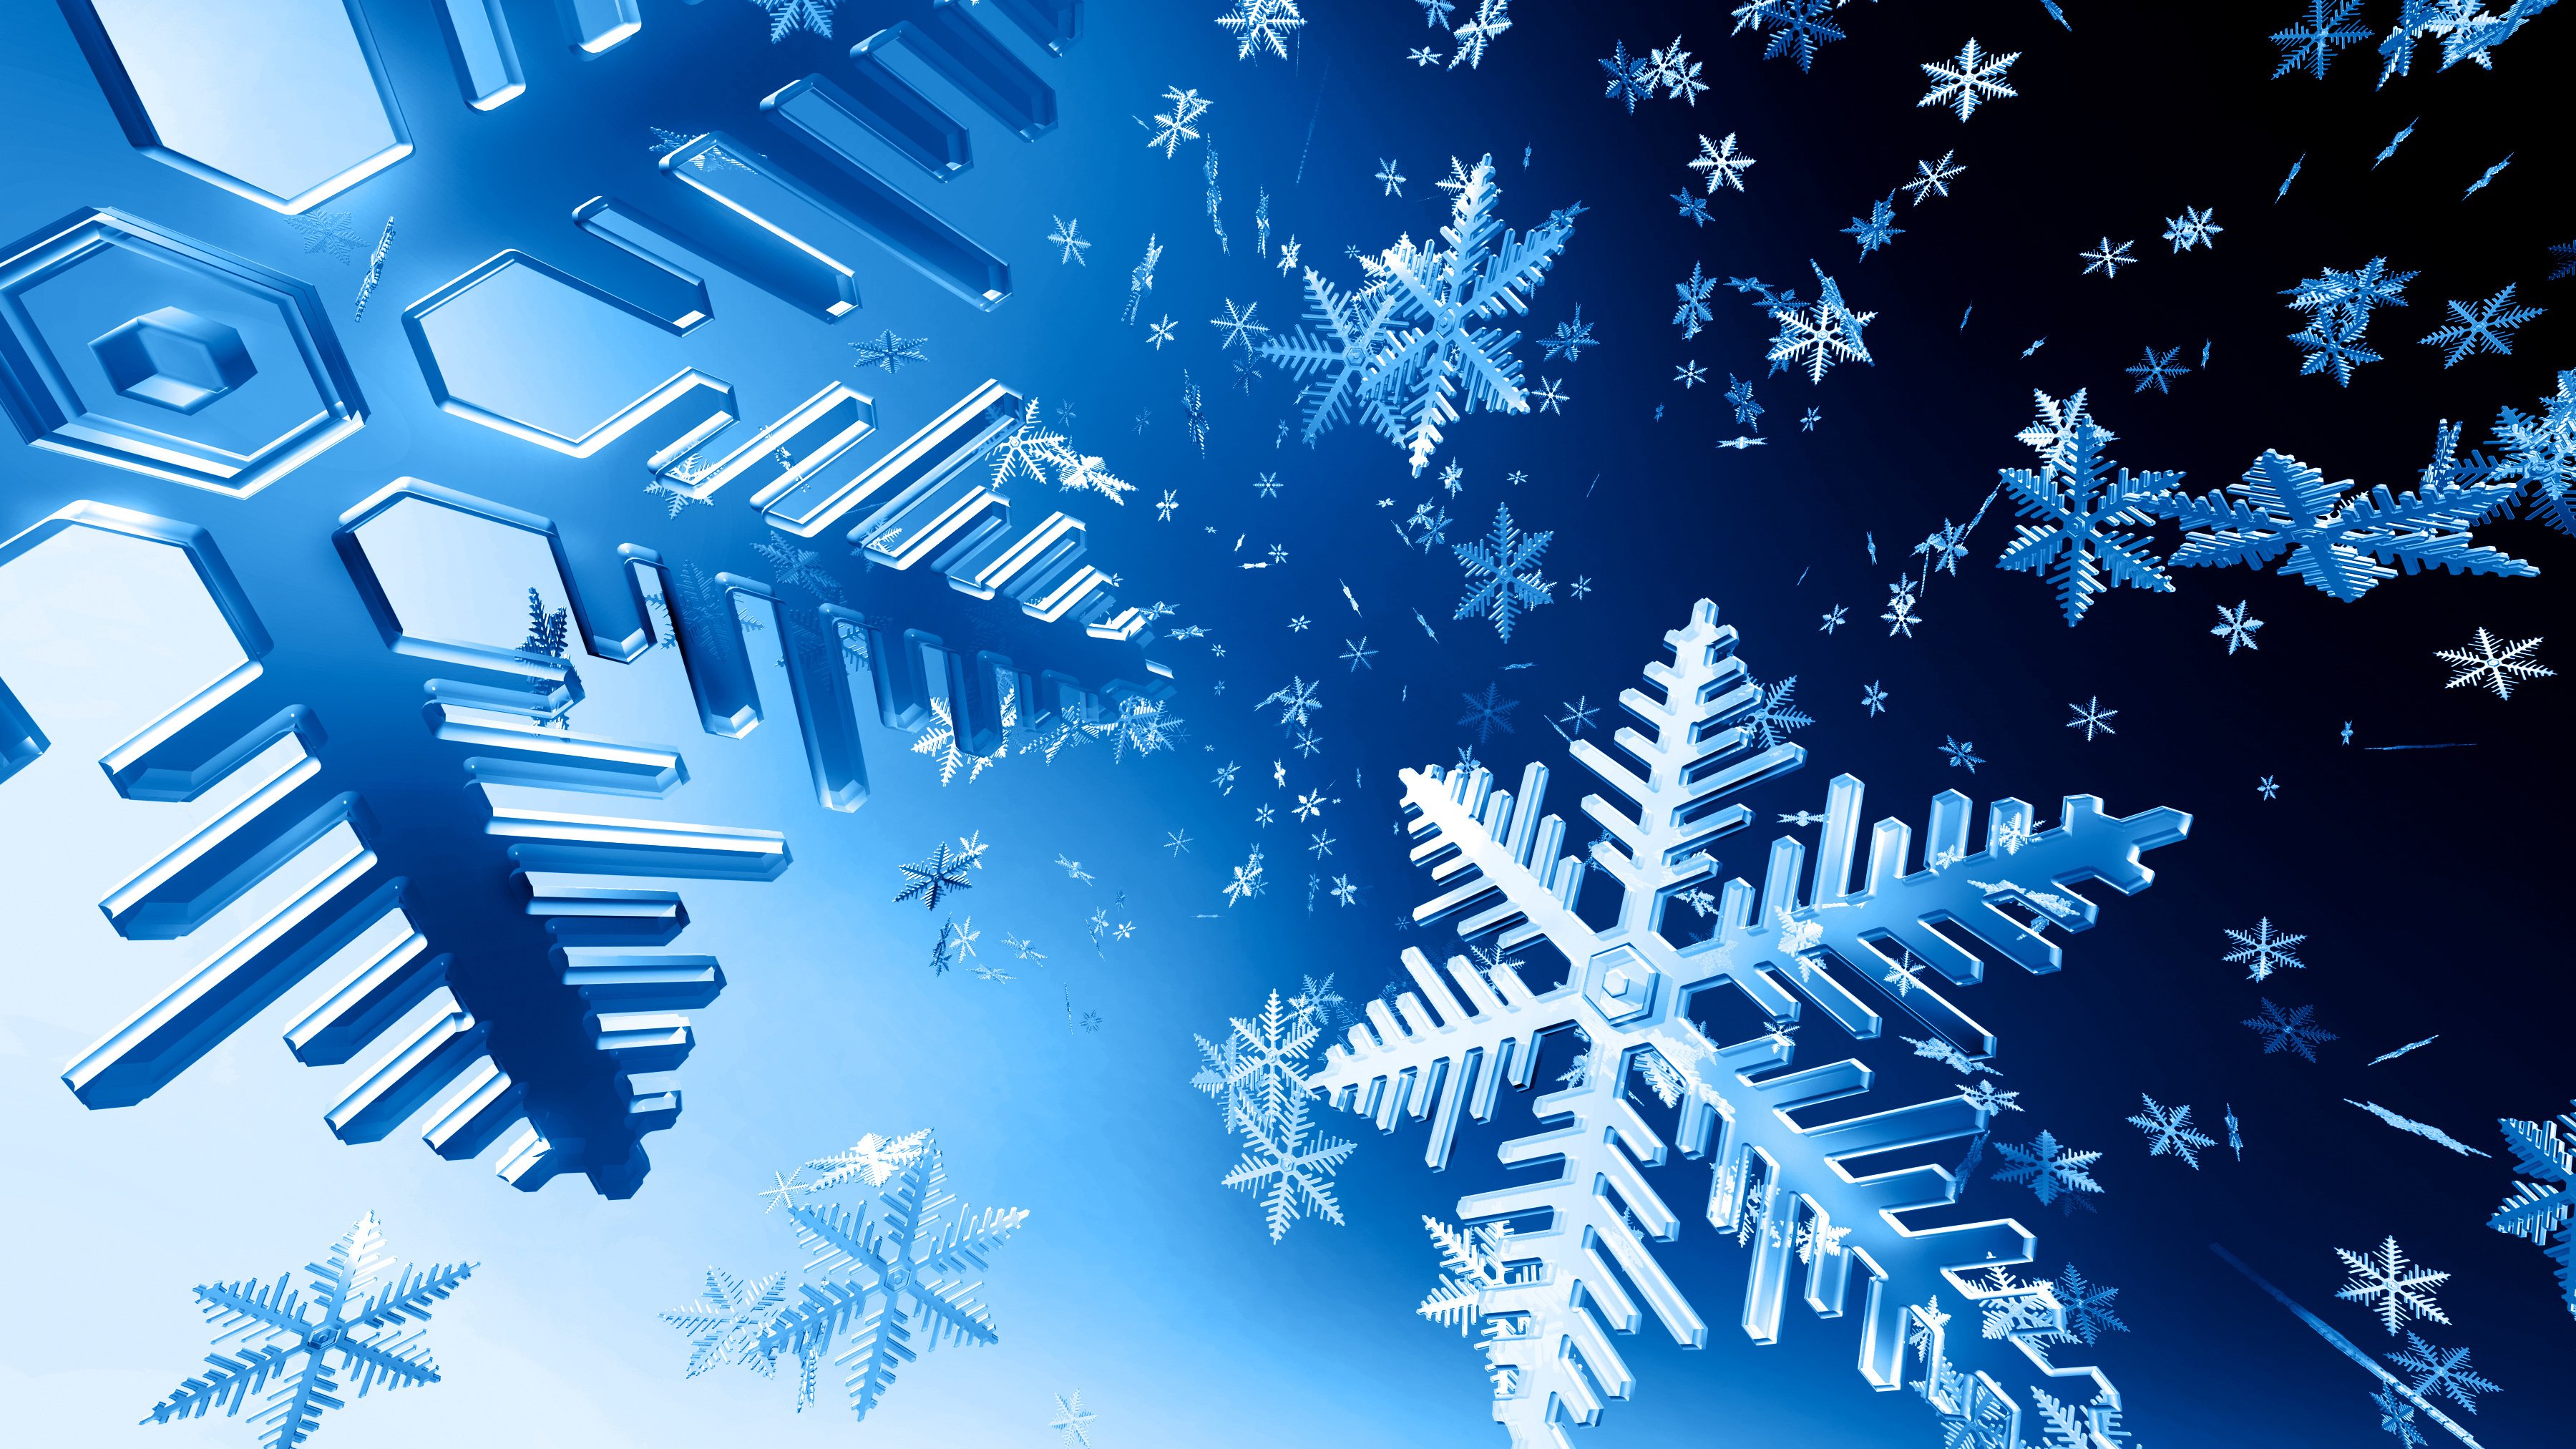 Wallpaper Snowflakes in perspective